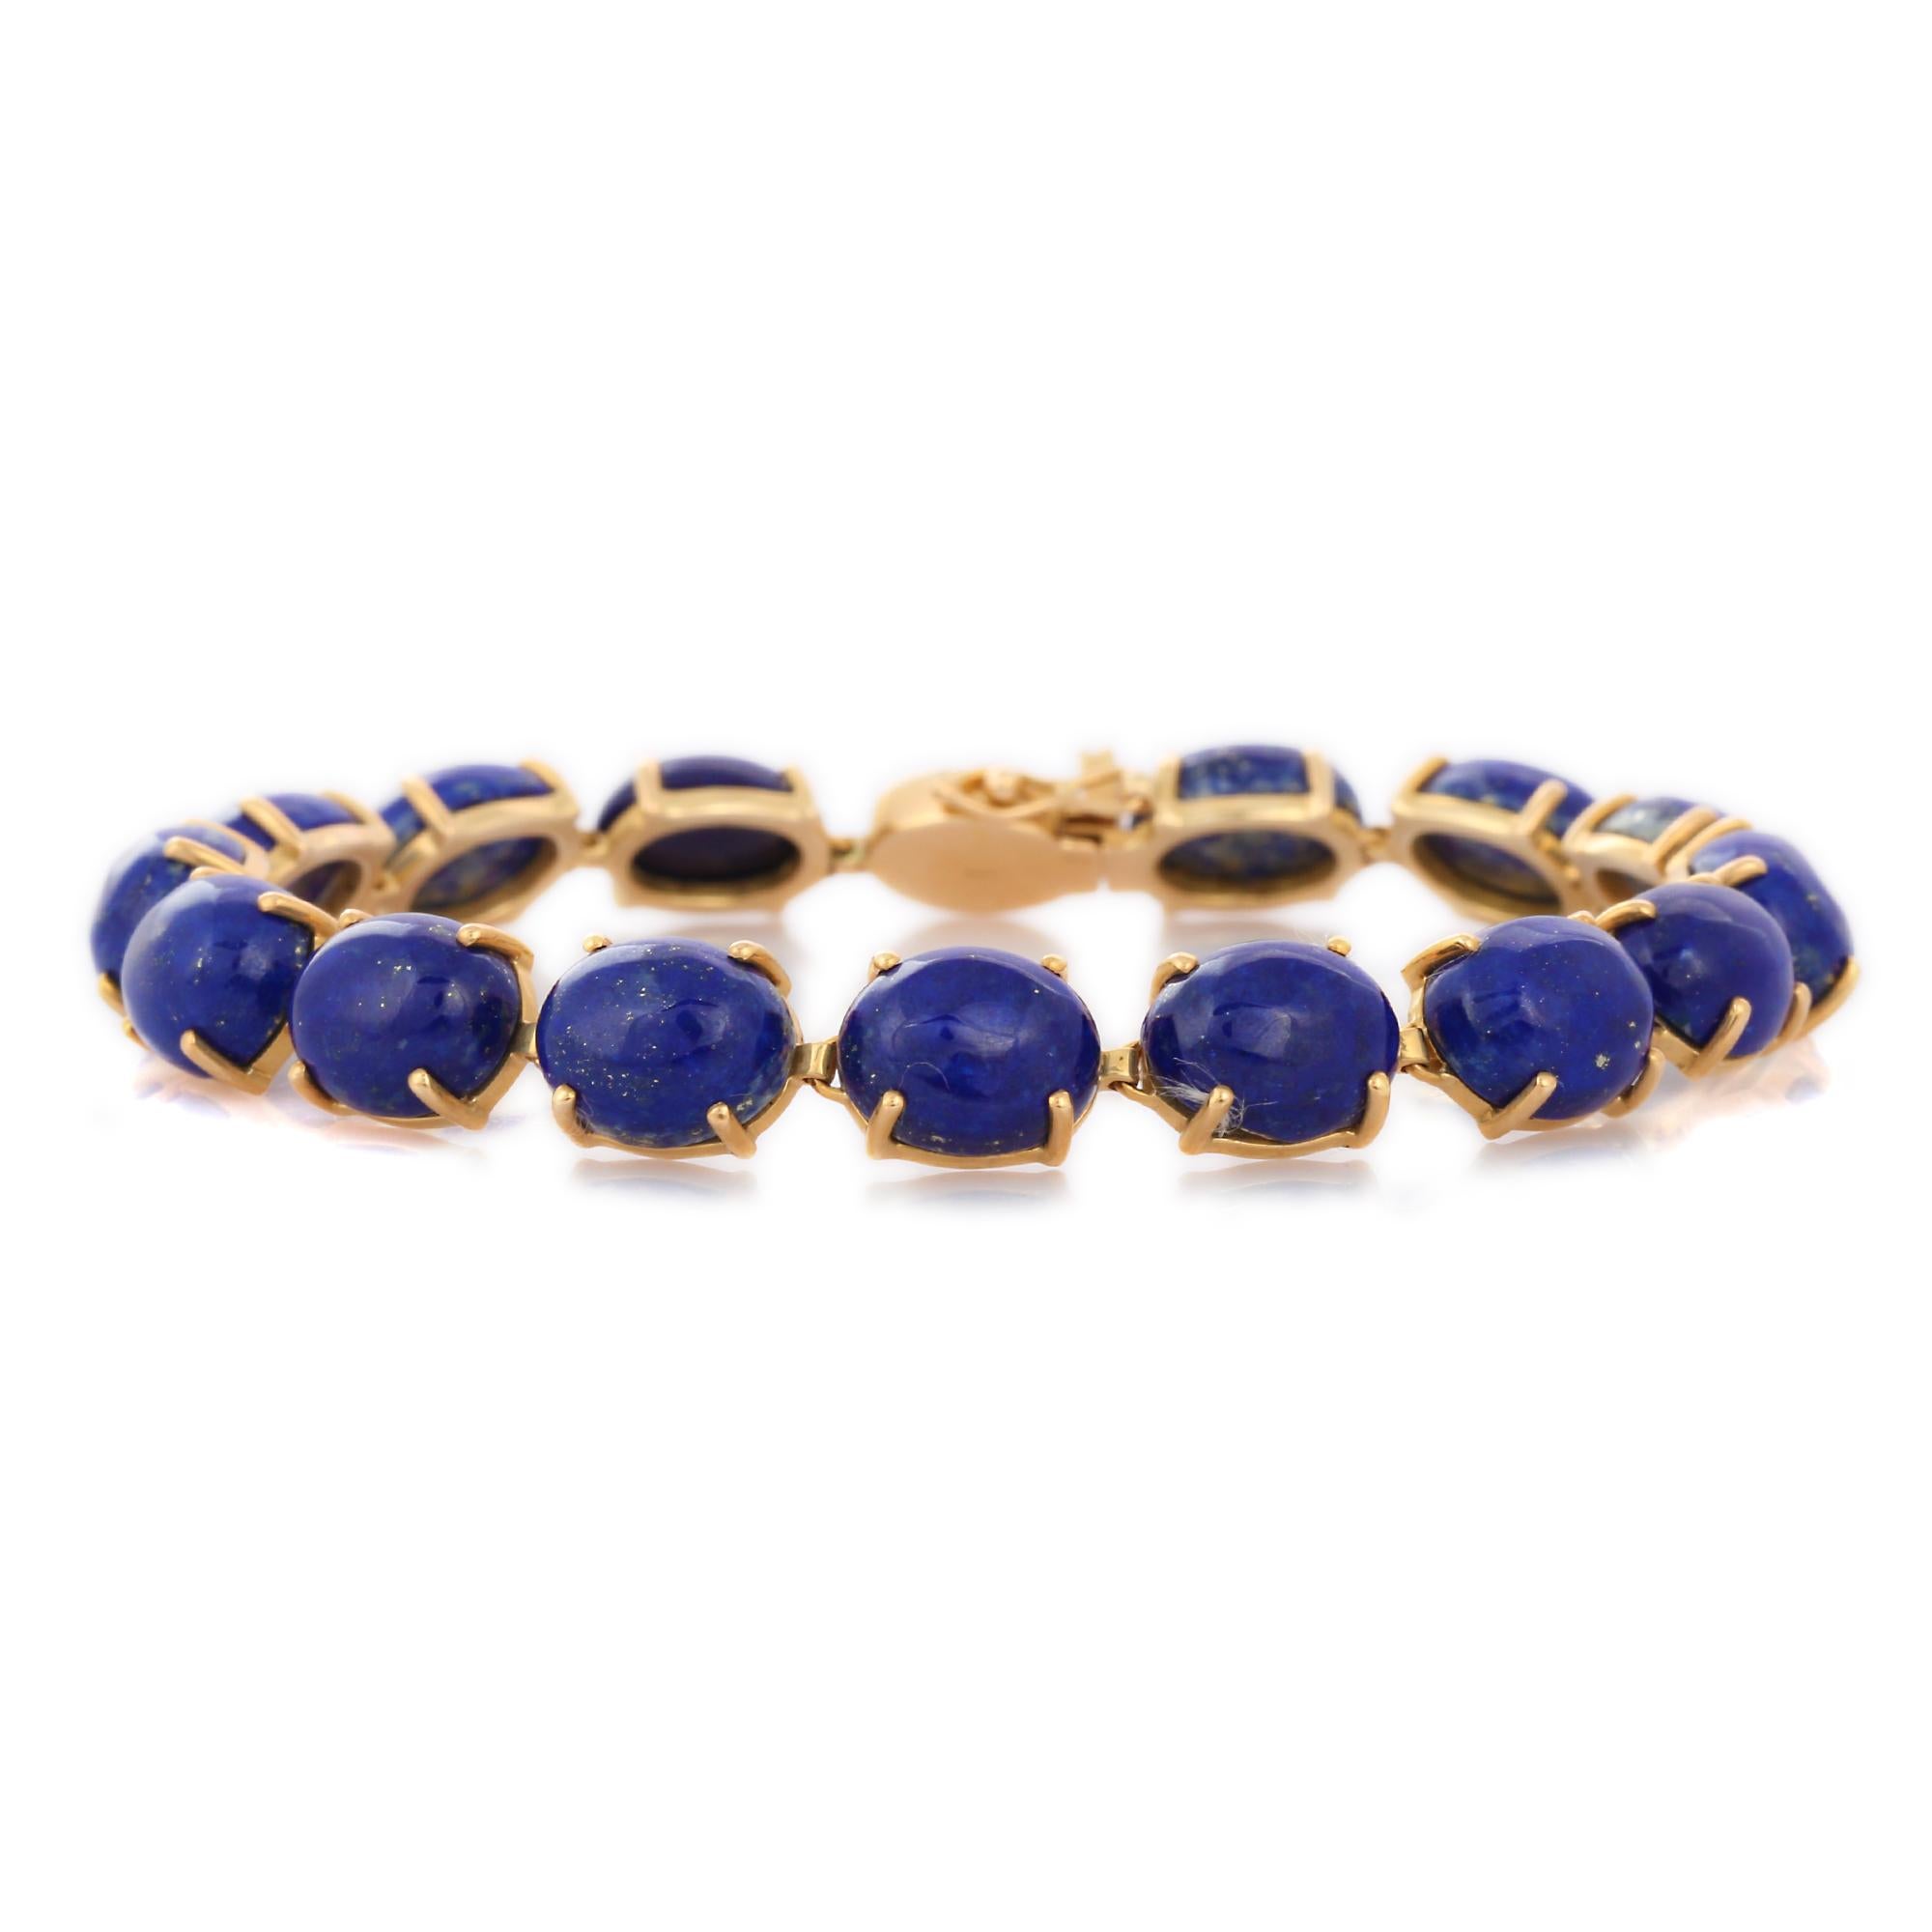 43 Ct Oval Cut Lapis Lazuli Prong Set Tennis Bracelet in 14K Solid Yellow Gold In New Condition For Sale In Houston, TX